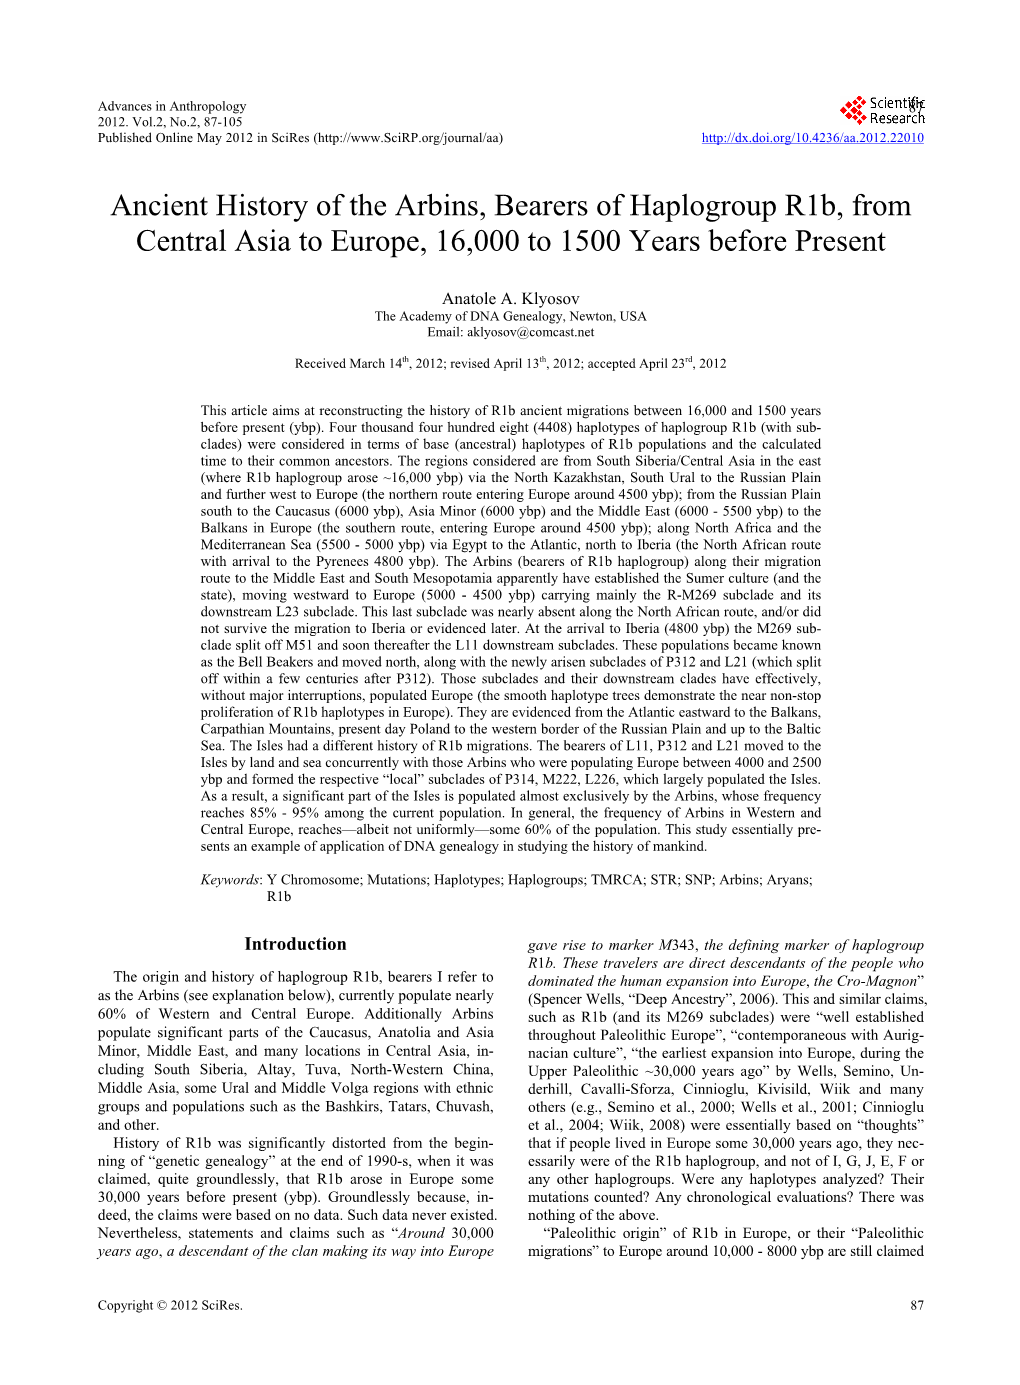 Ancient History of the Arbins, Bearers of Haplogroup R1b, from Central Asia to Europe, 16,000 to 1500 Years Before Present